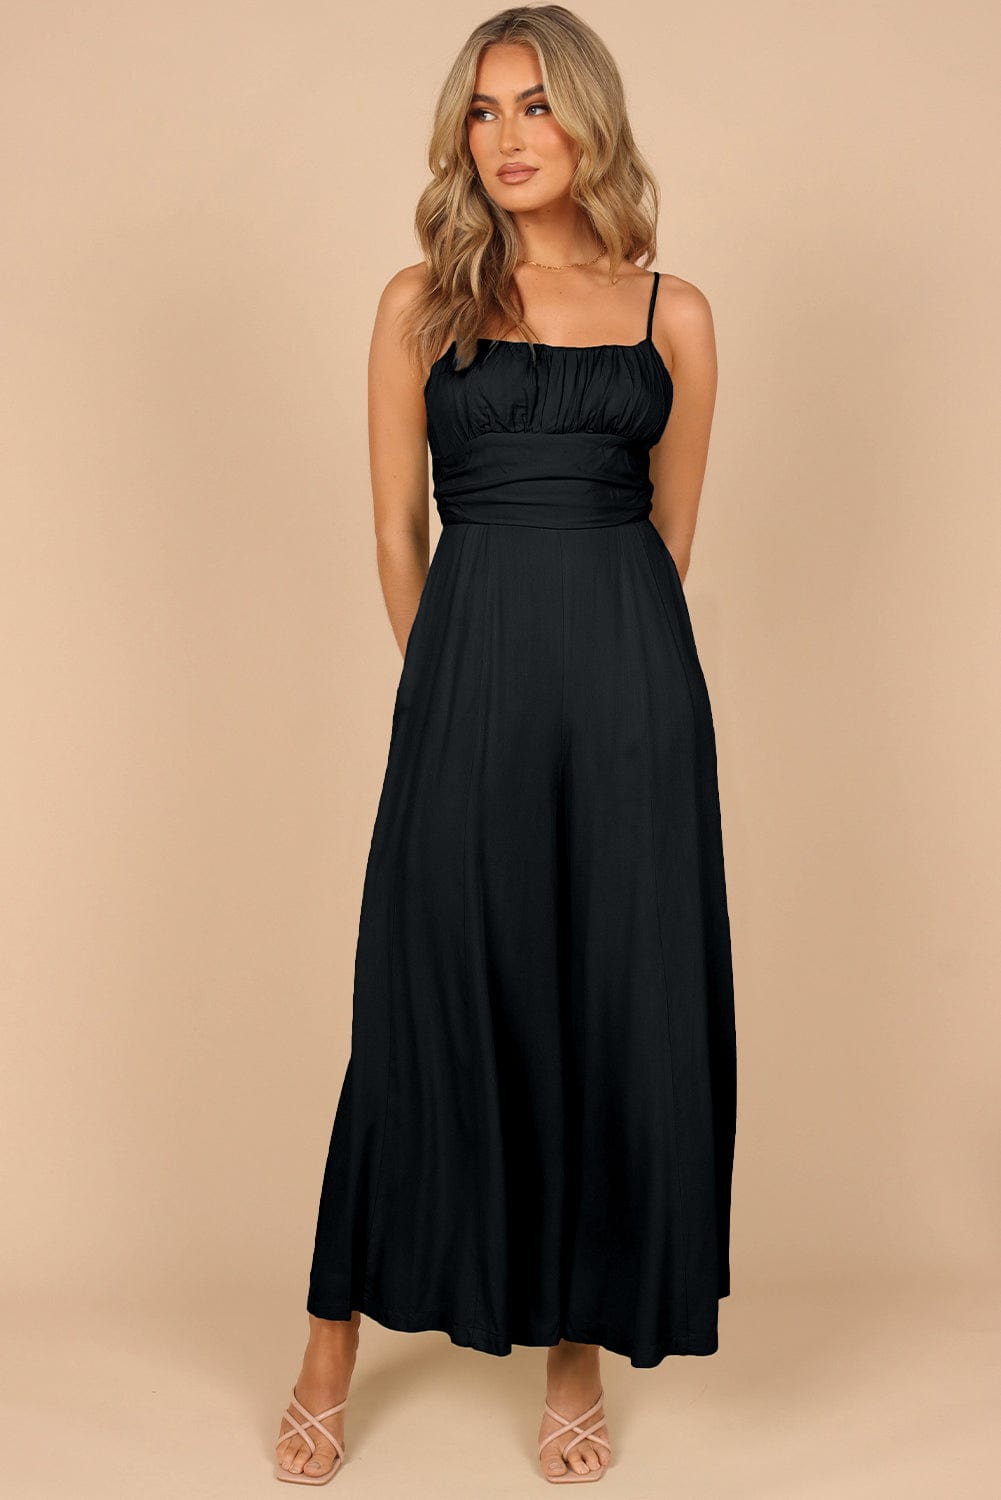 The802Gypsy  Jumpsuits & Rompers TRAVELING GYPSY-Spaghetti Straps Backless Knot Wide-Leg Jumpsuit